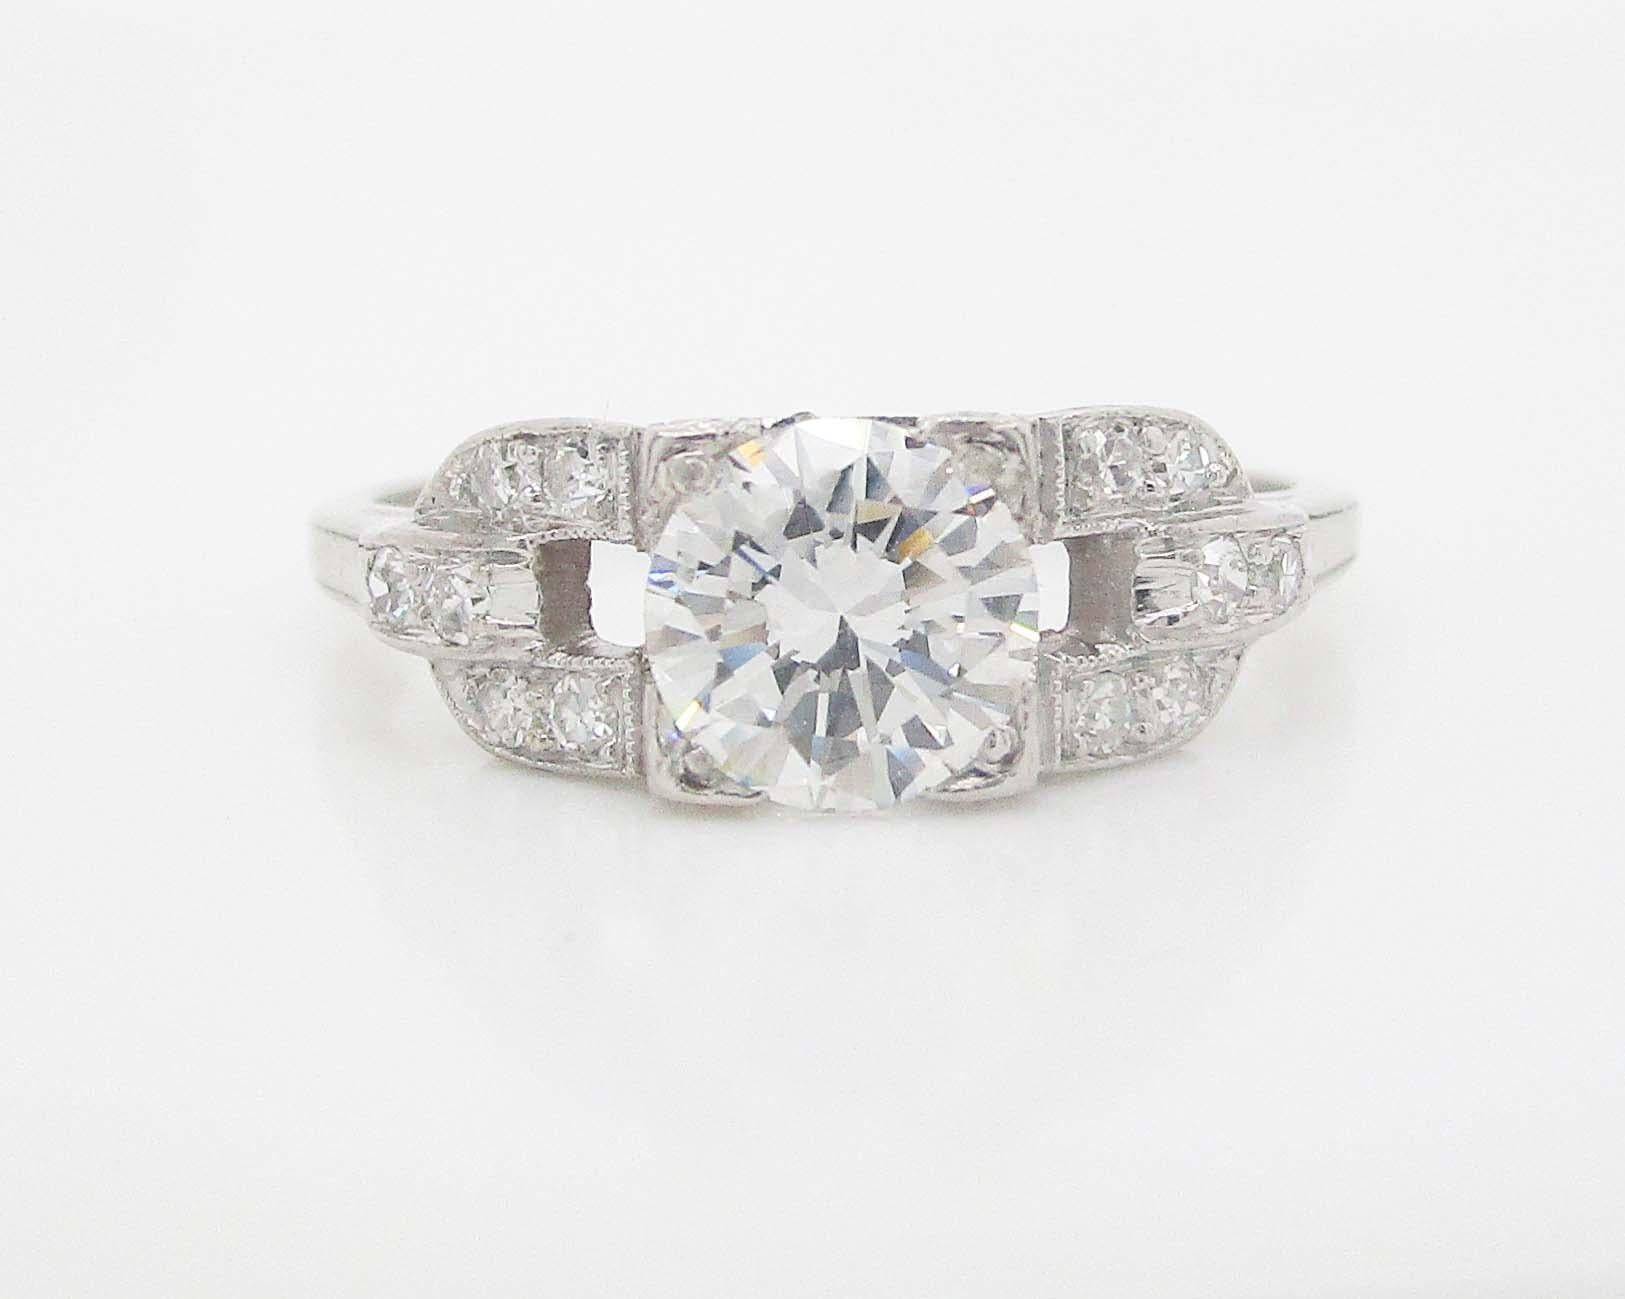 Art Deco 1920's Deco European Cut Diamond Engagement Ring with GIA Report For Sale